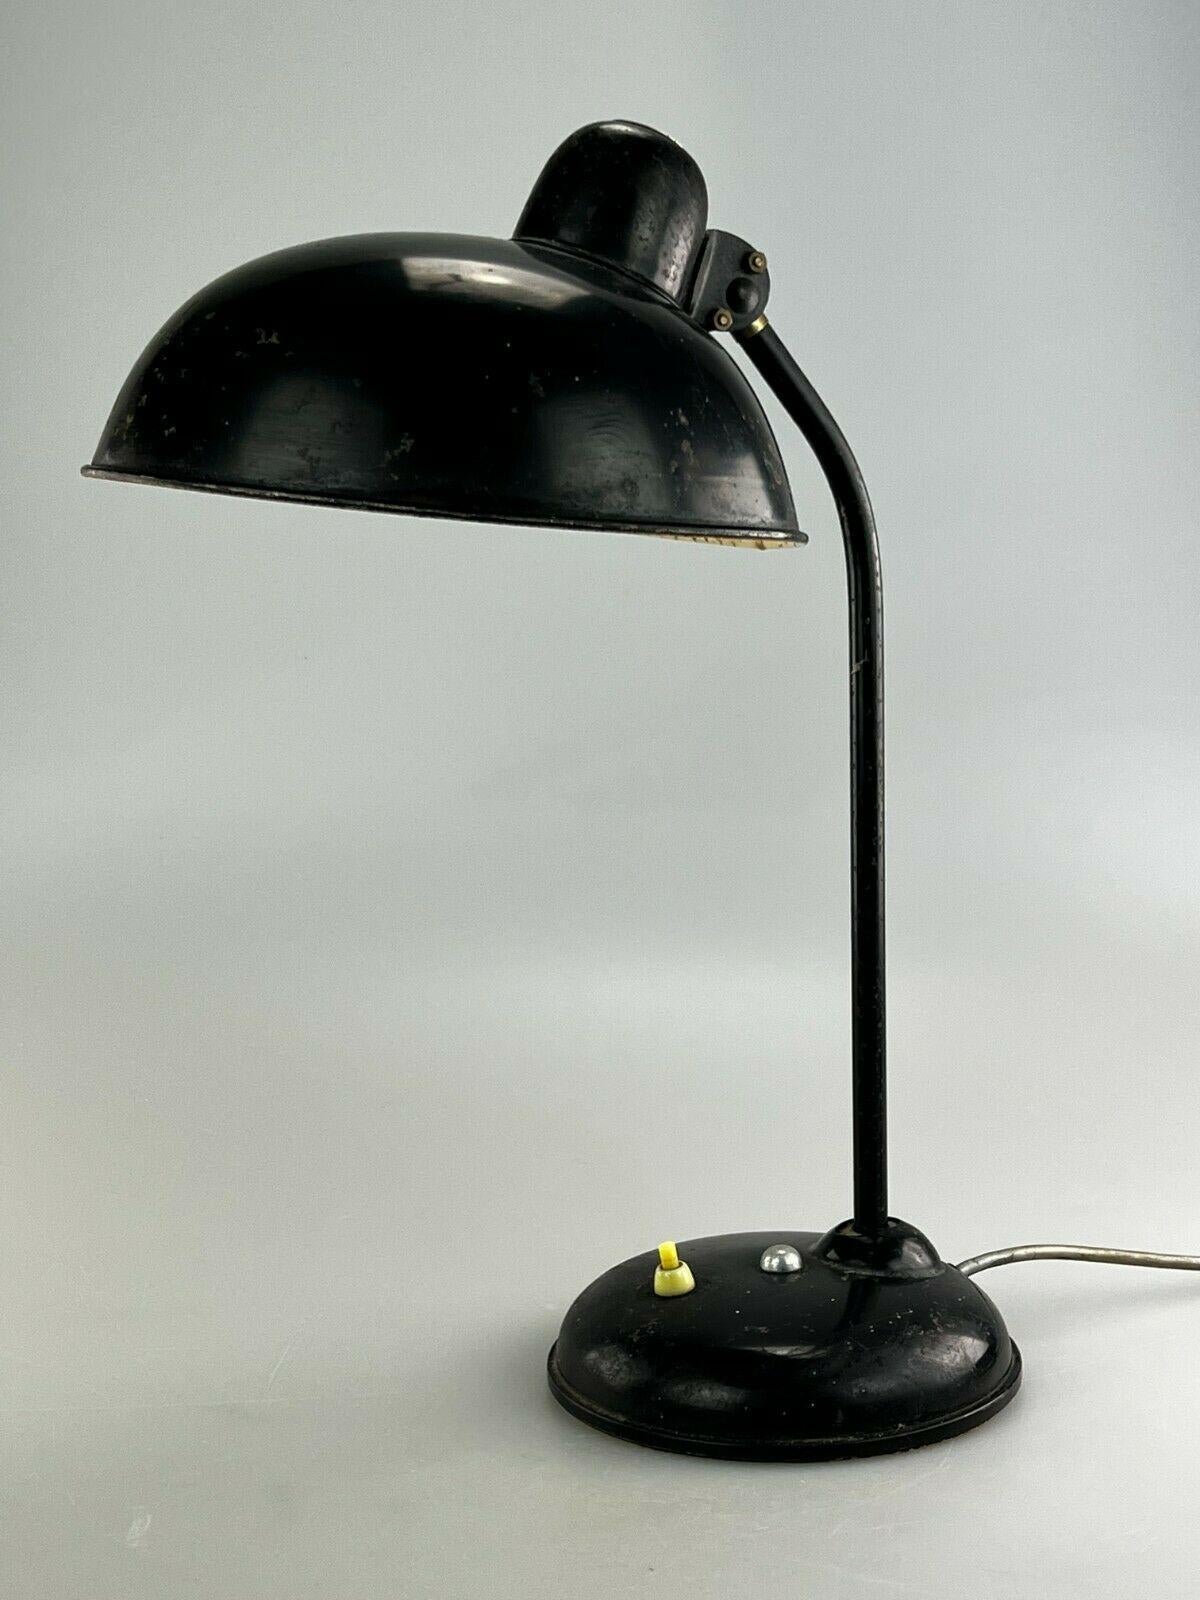 50s 60s lamp light desk lamp Helo Leuchten Germany 50s 60s

Object: table lamp

Manufacturer: Hello

Condition: vintage

Age: around 1960-1970

Dimensions:

35cm x 24.5cm x 45cm

Other notes:

The pictures serve as part of the